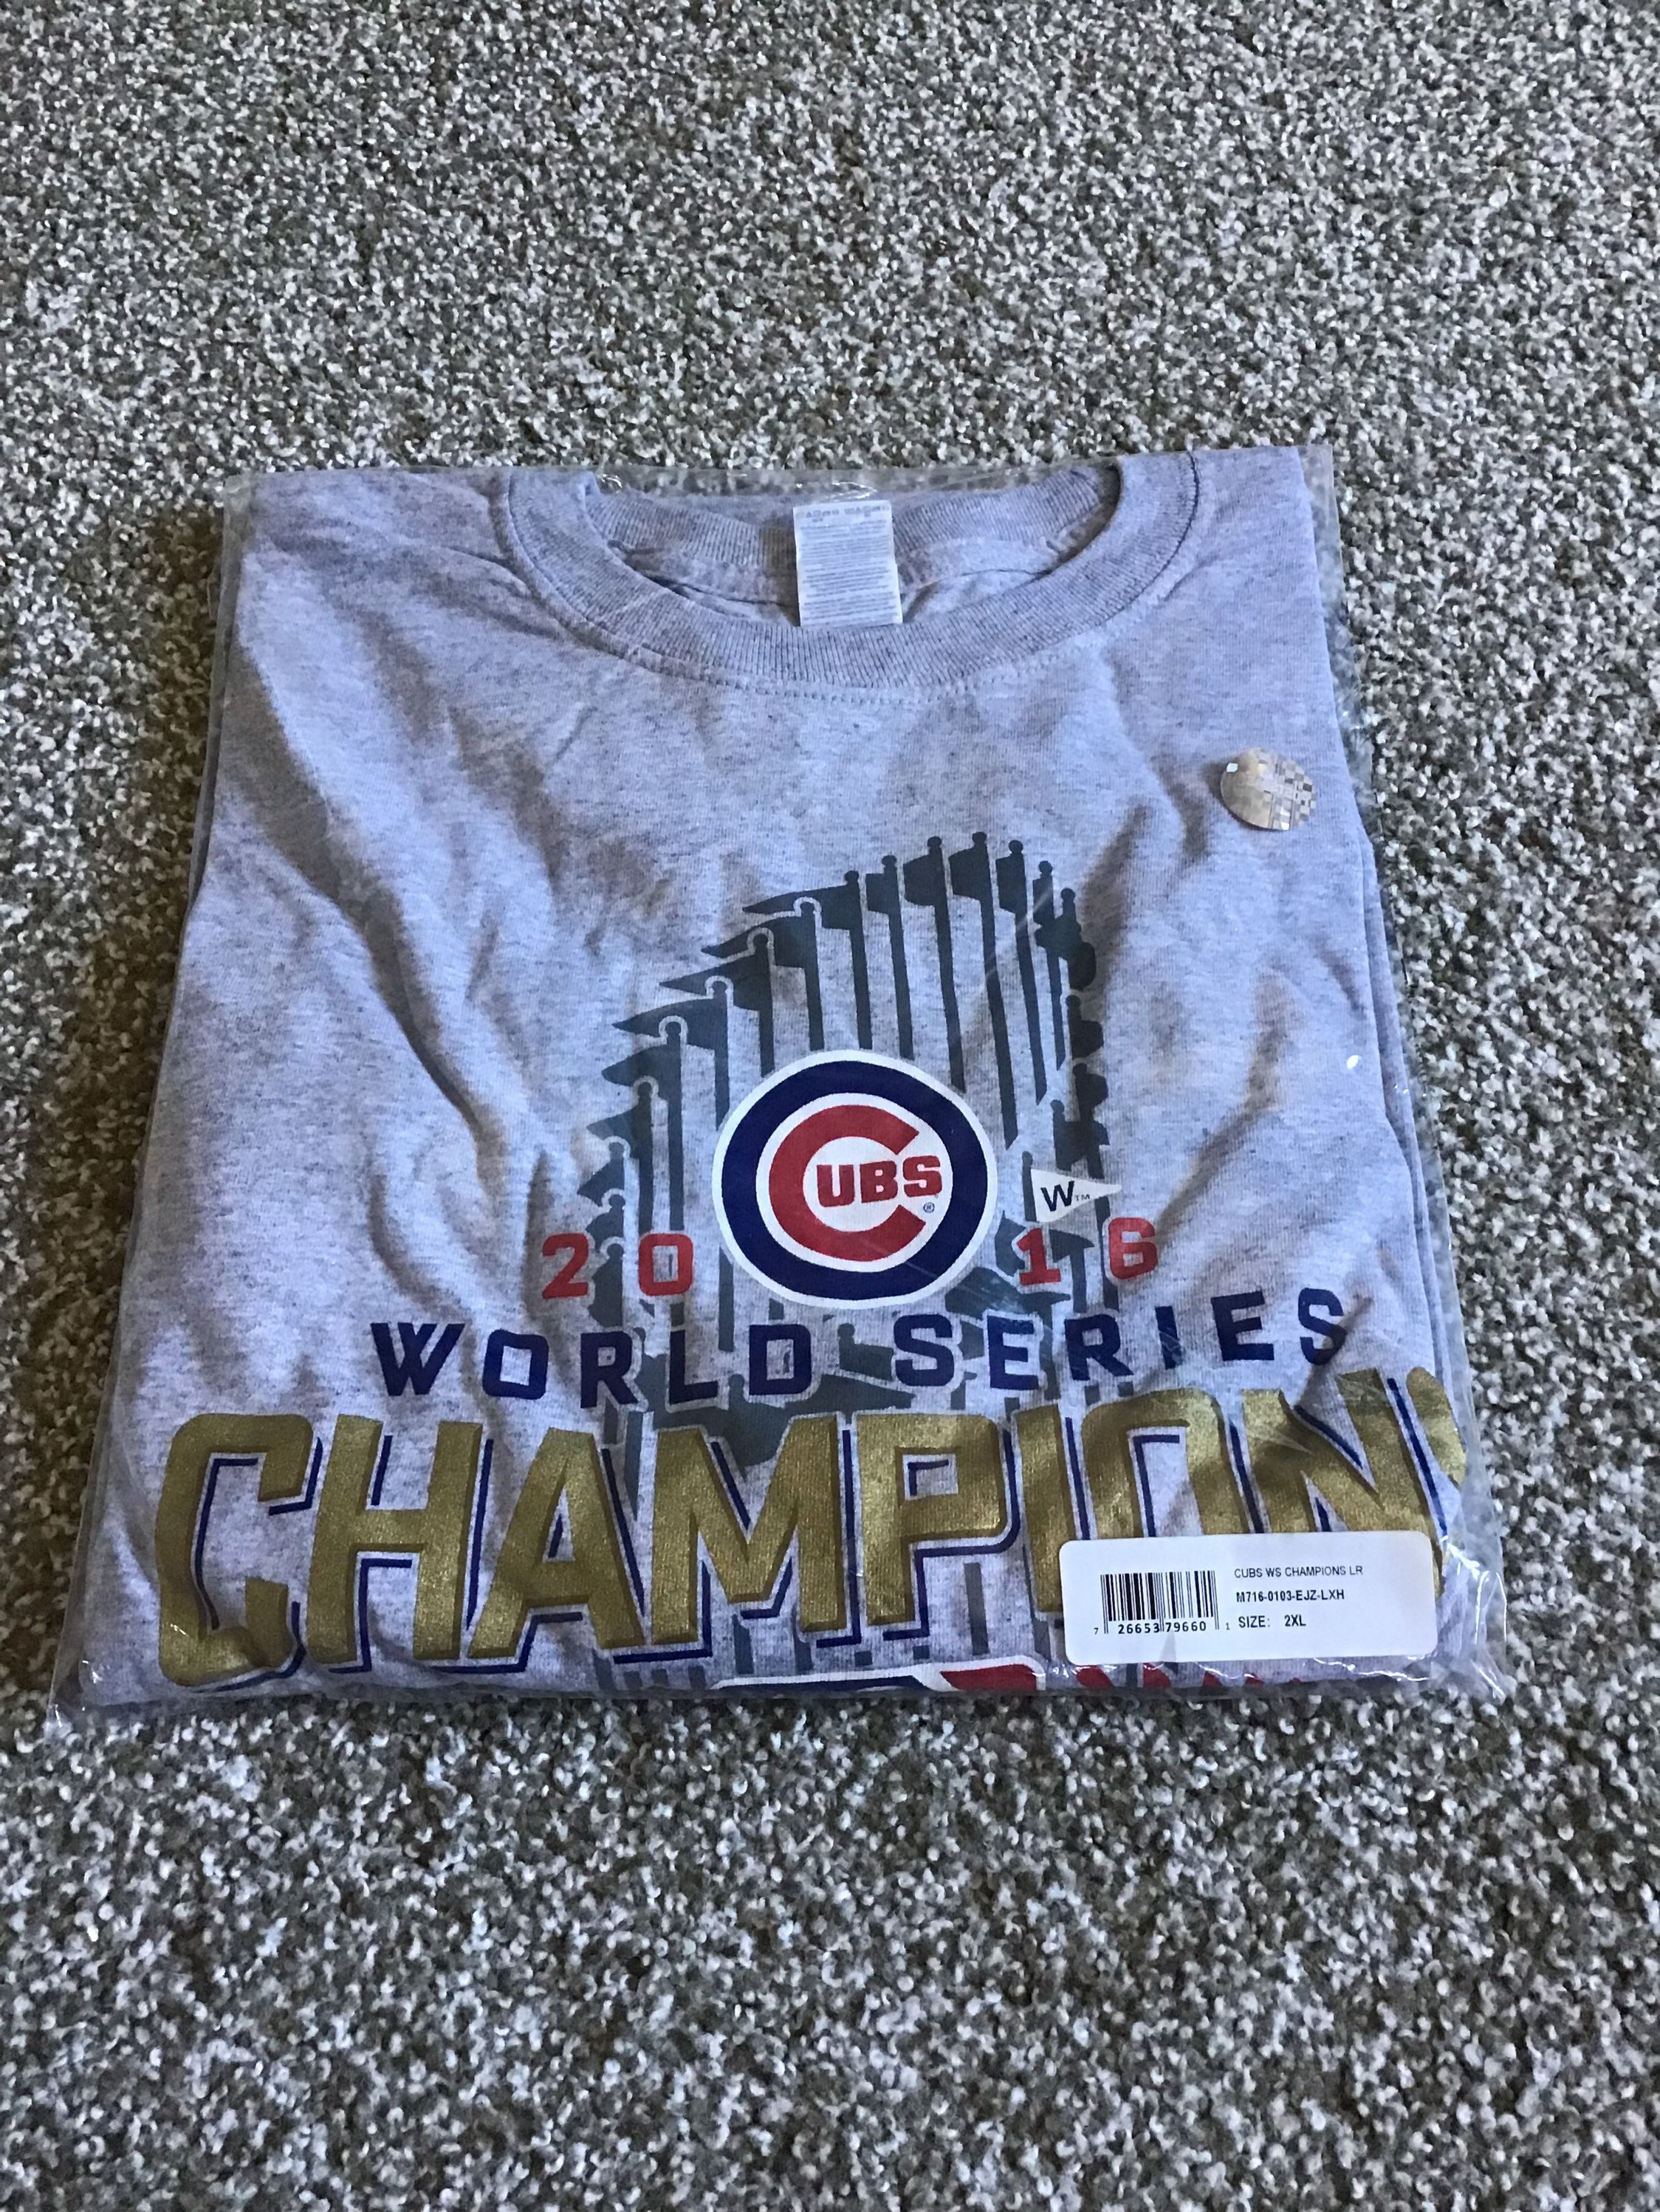 World Series 2016 Chicago Cubs t-shirt by To-Tee Clothing - Issuu